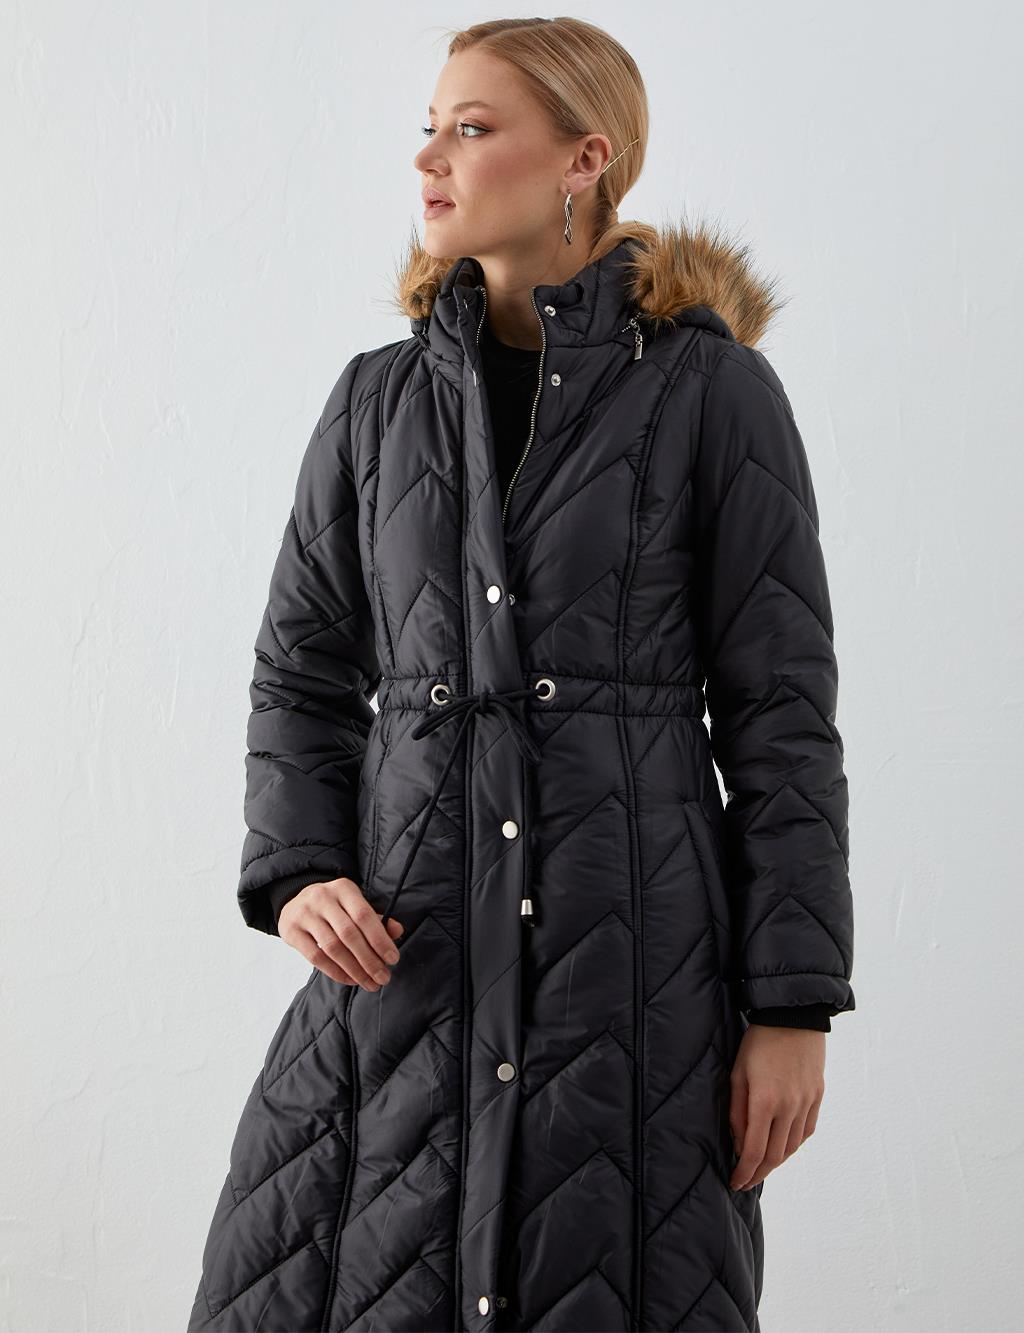 Waist Pleated Zigzag Quilted Inflatable Coat Black